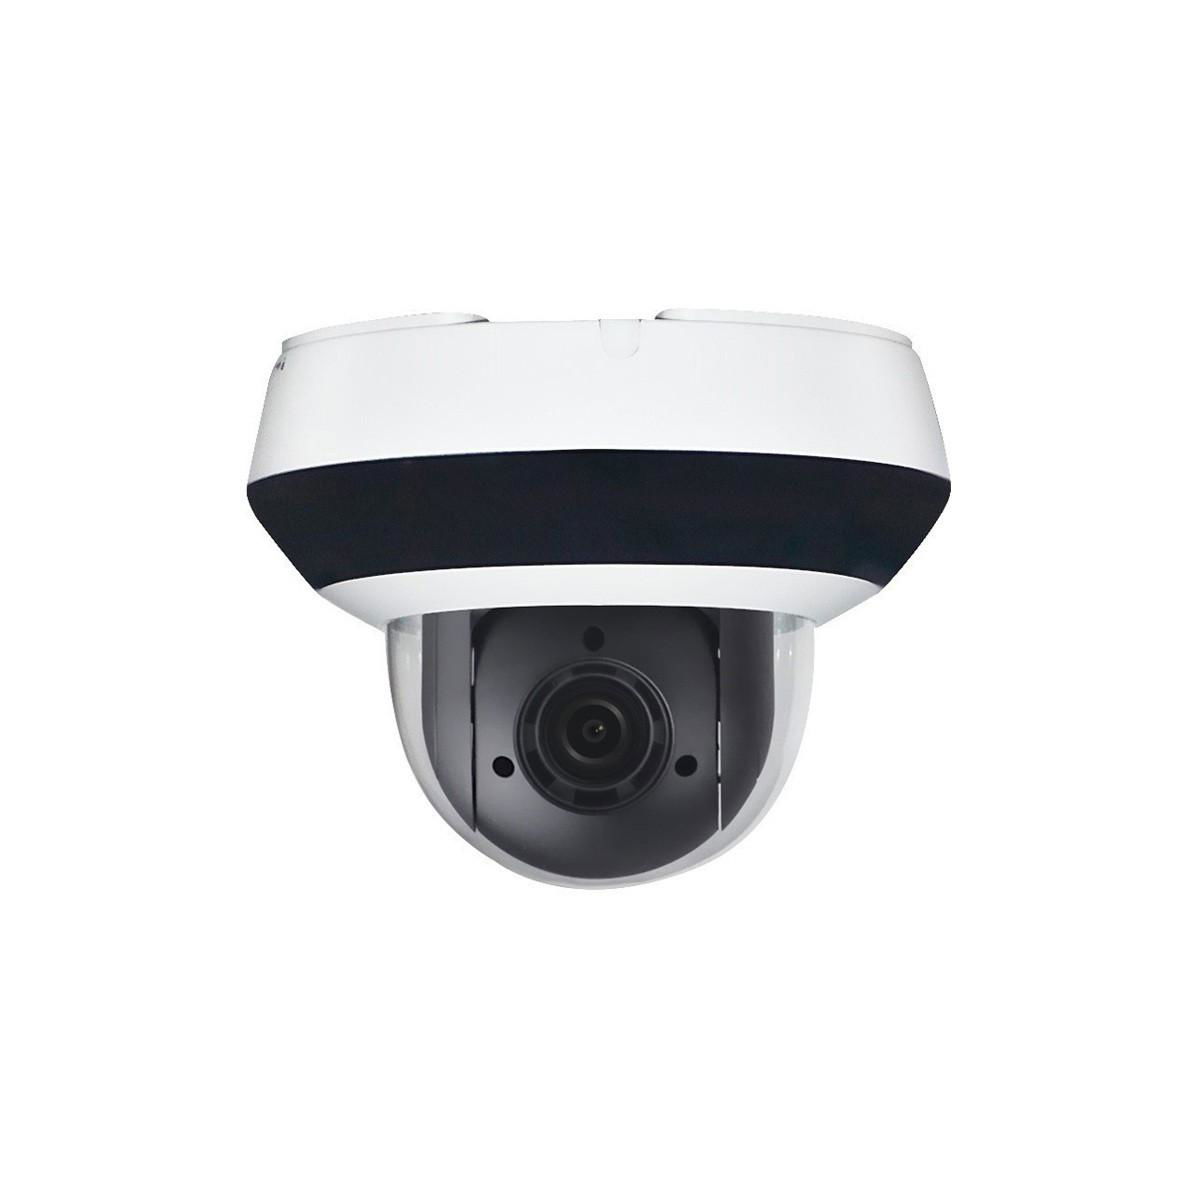 DT2A404  4MP IR Fixed Bullet Network Camera     Ip Bullet Camera With Zoom 3